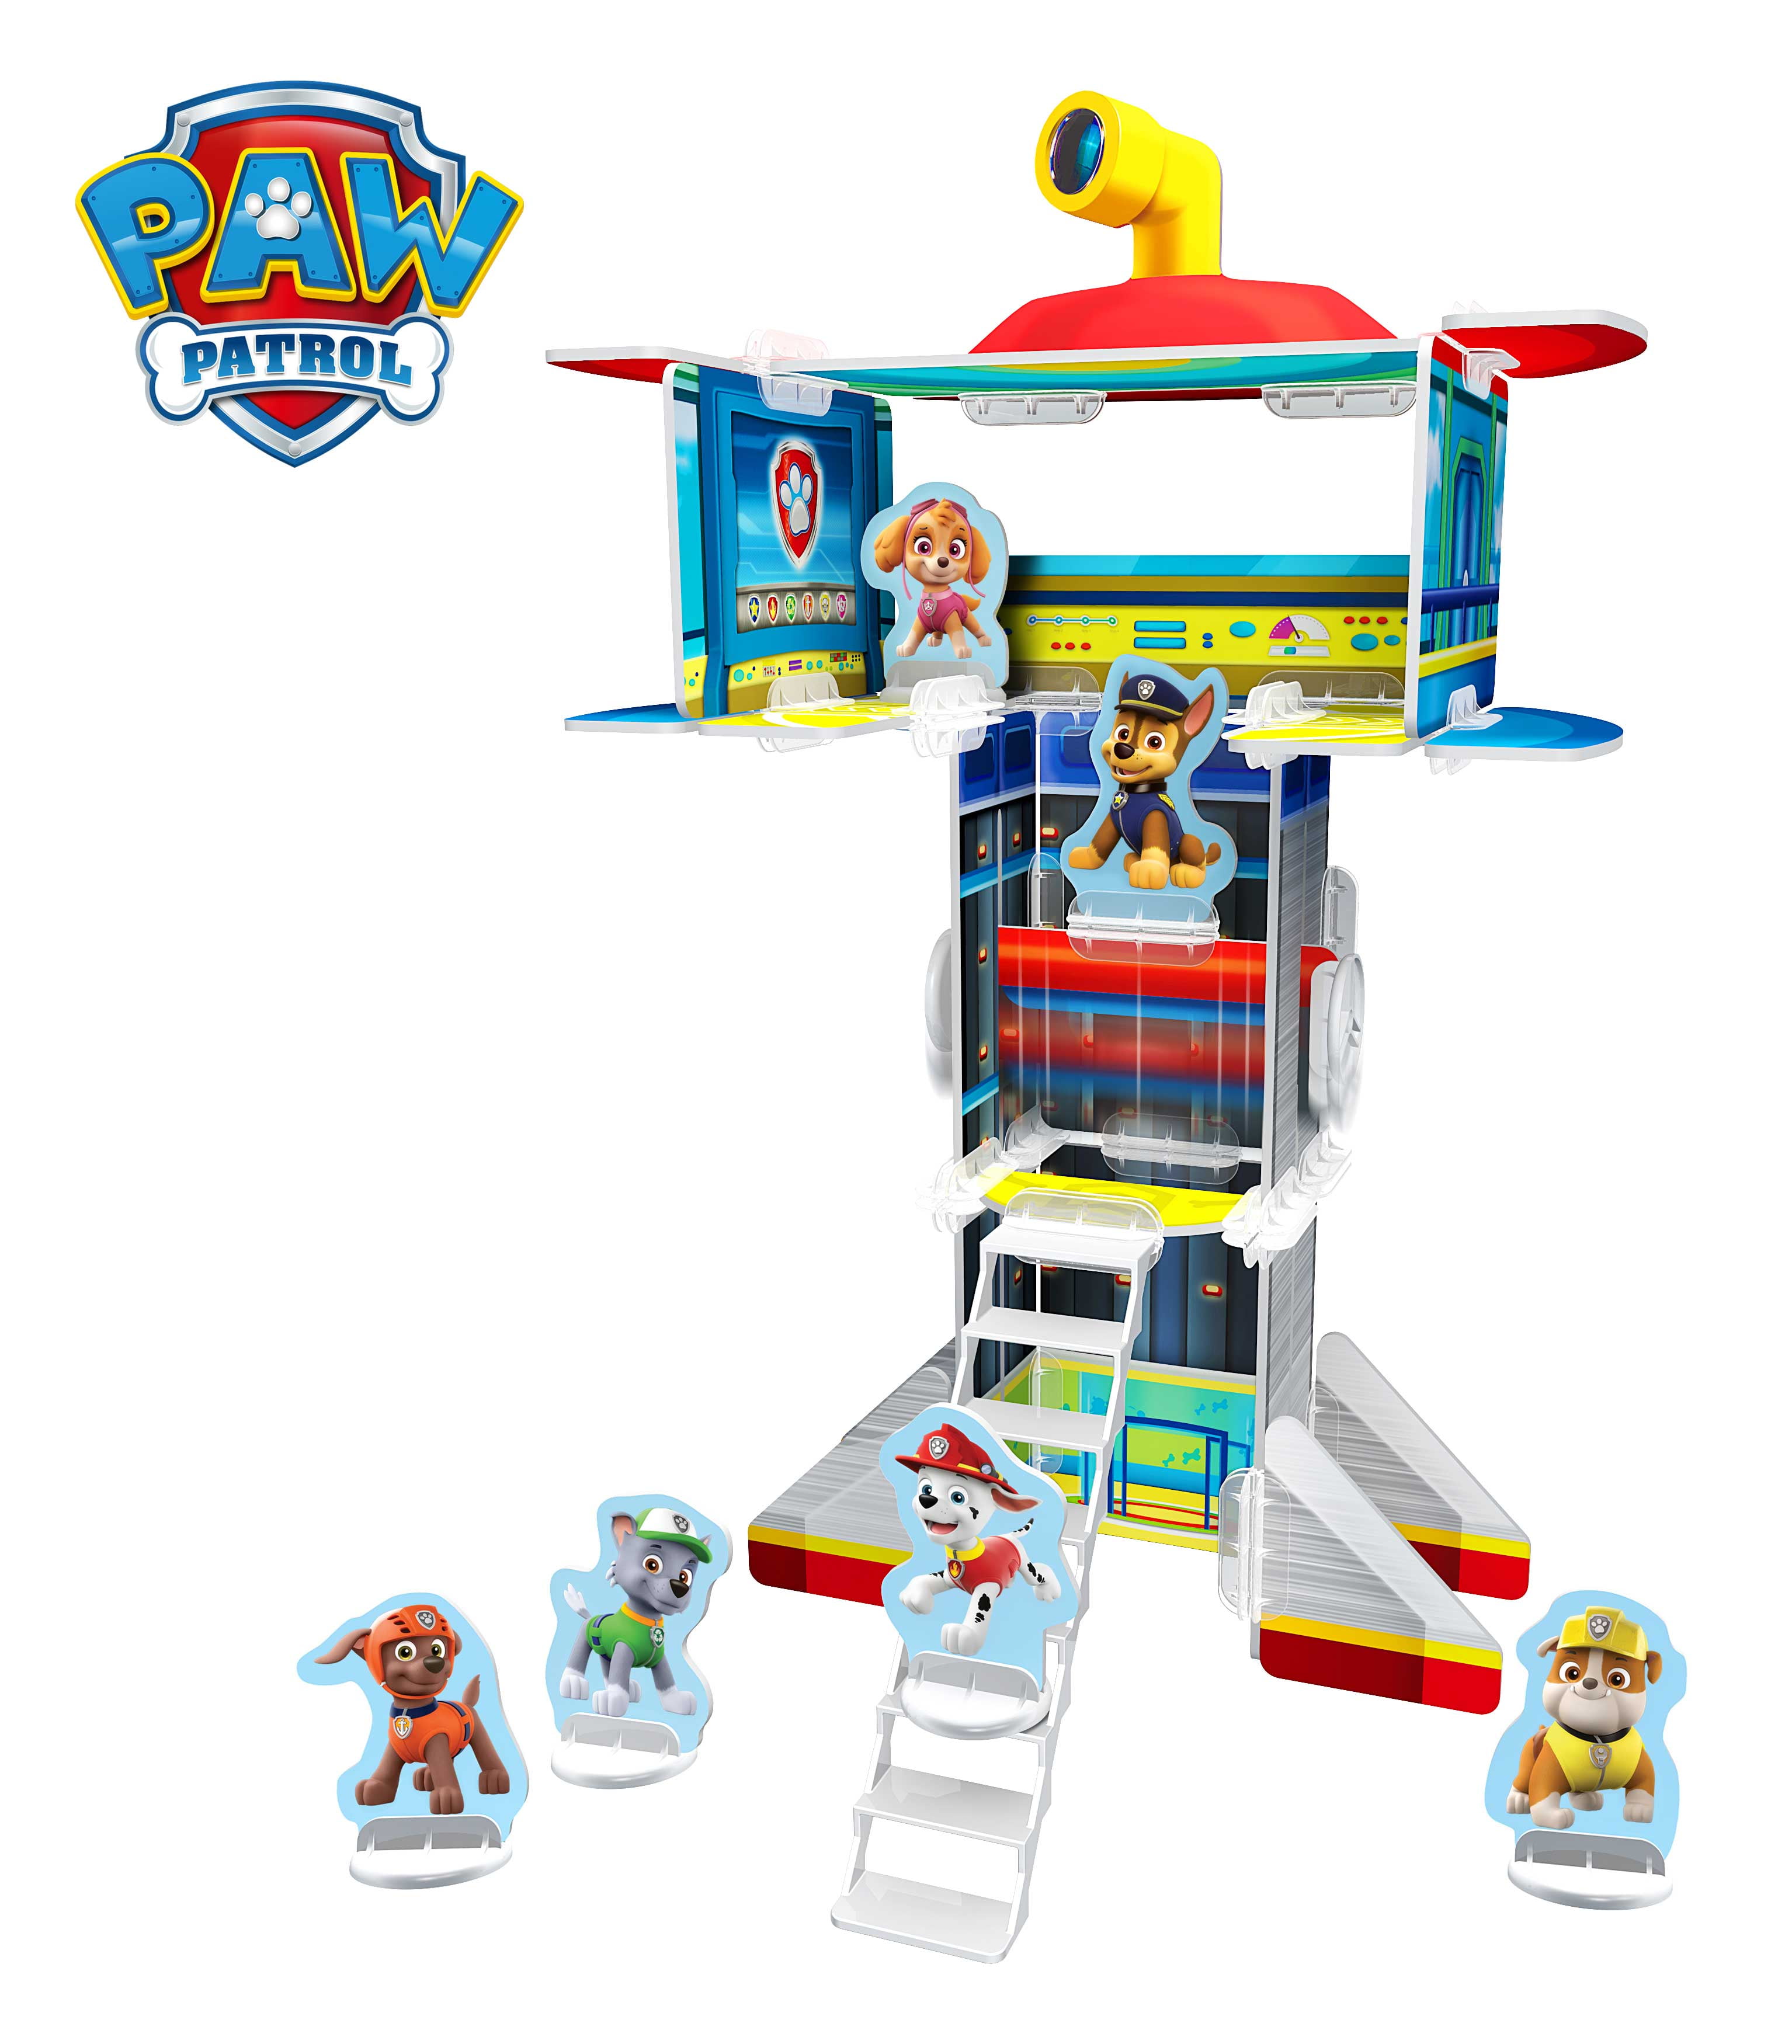 Paw patrol lookout tower